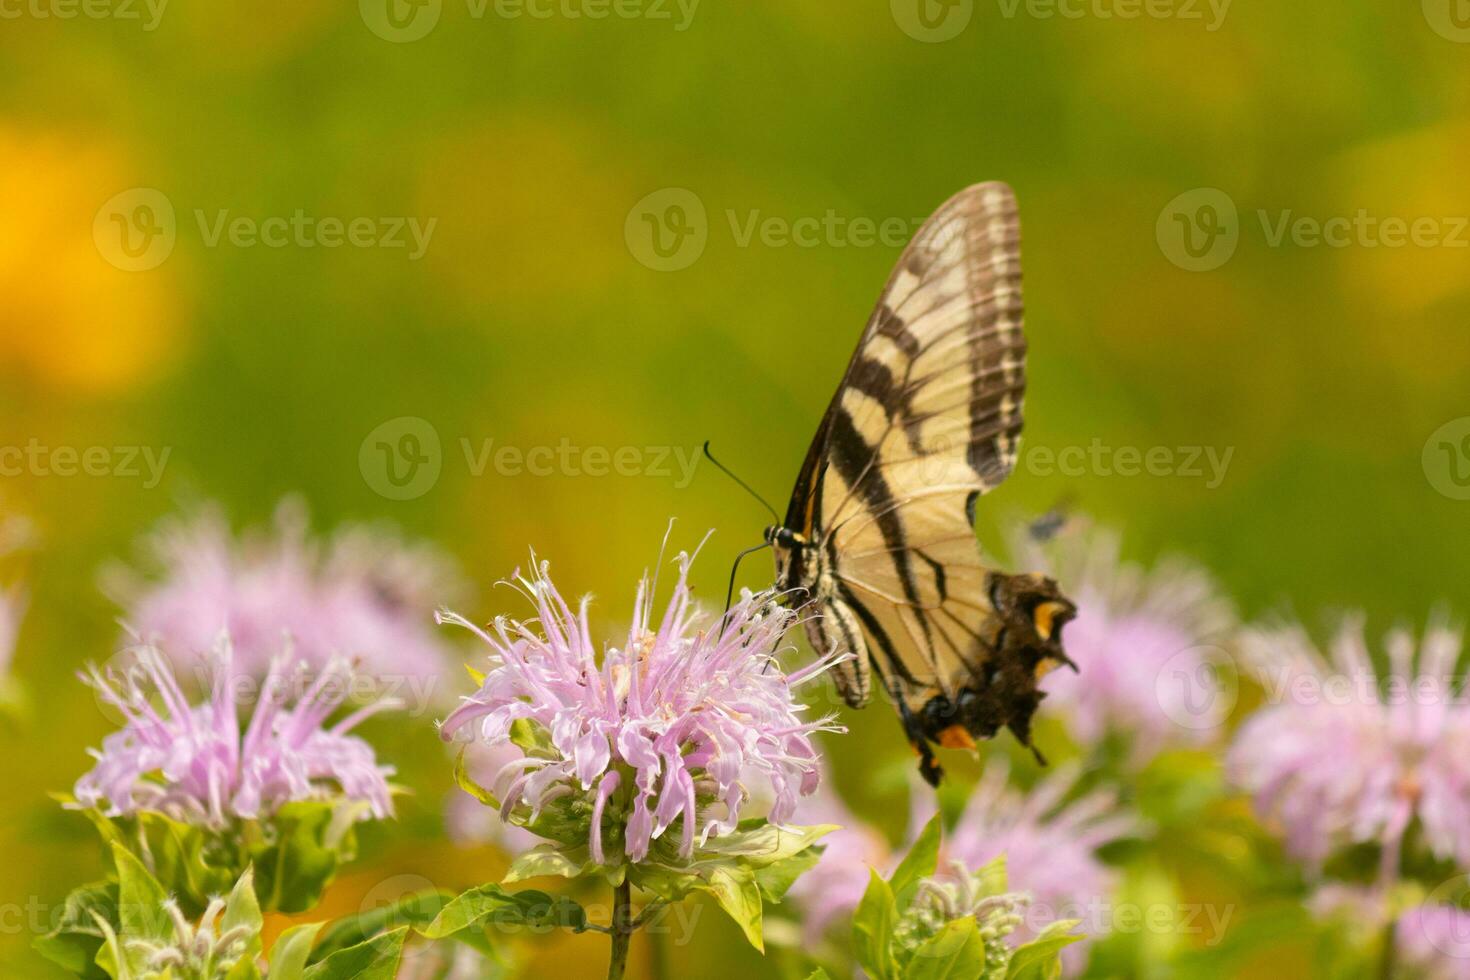 Butterfly coming out into the wildflower field for some nectar. The eastern tiger swallowtail has her beautiful black and yellow wings stretched out. Her legs holding onto a wild bergamot flower. photo